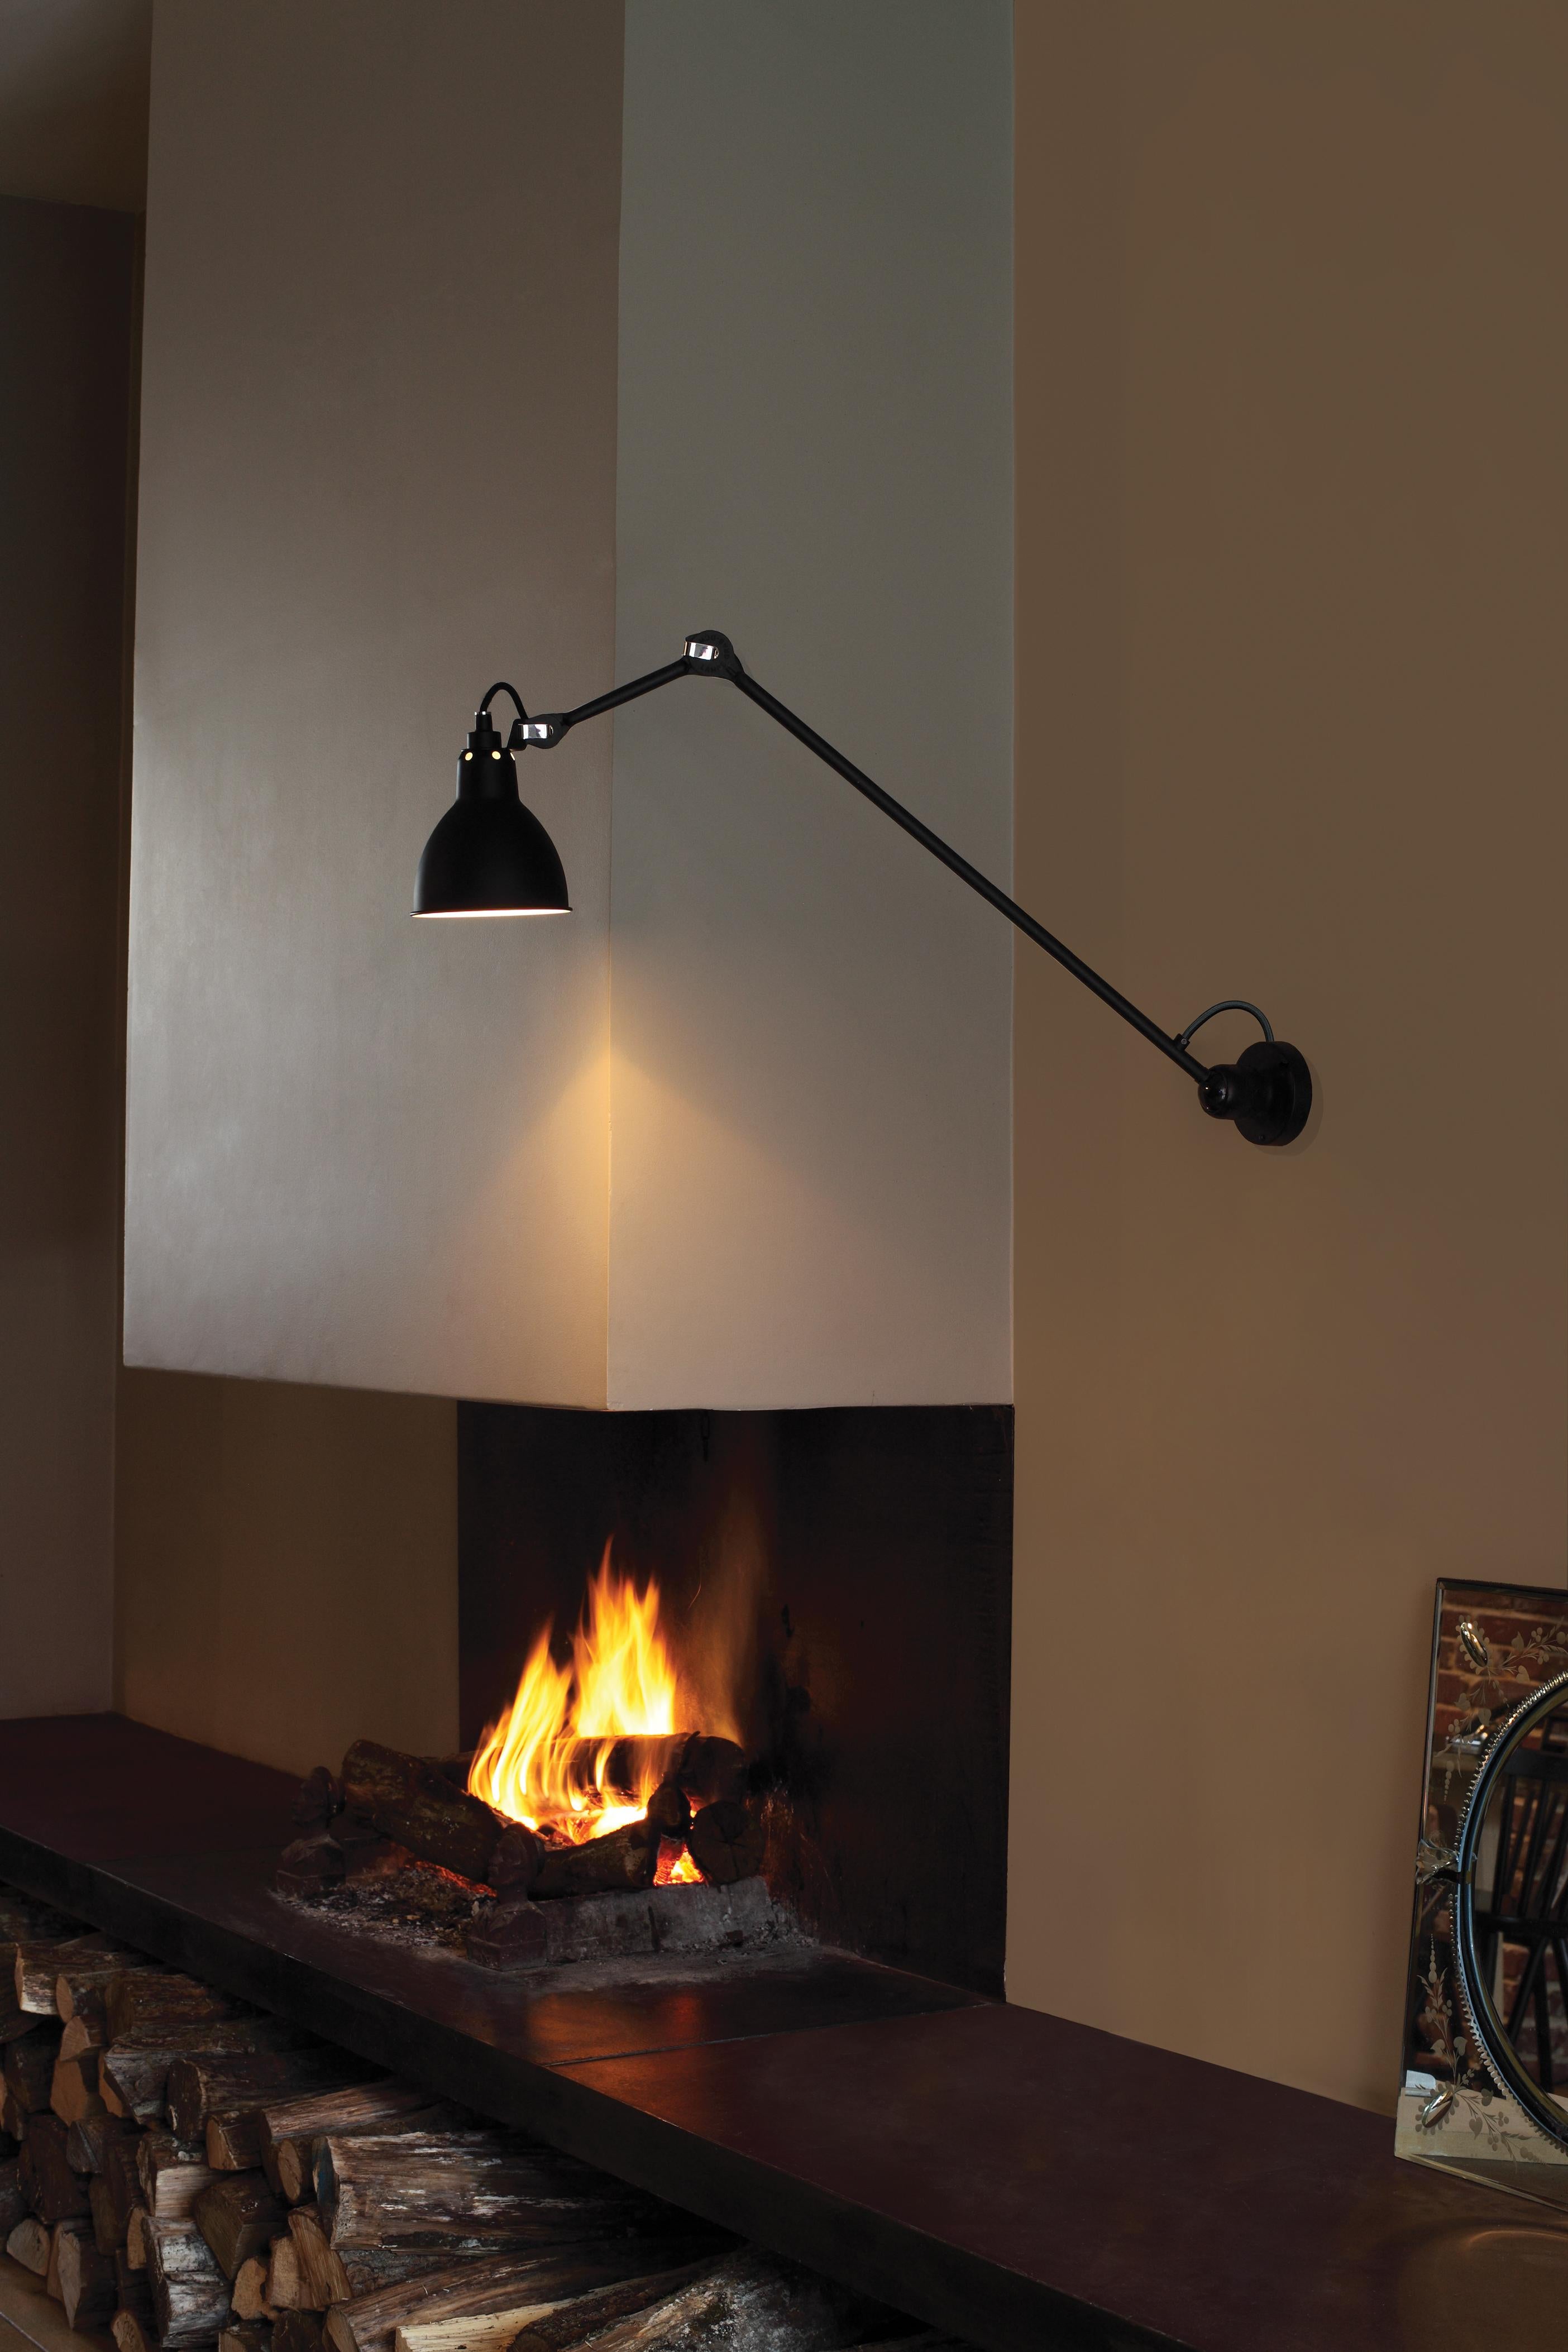 DCW Editions La Lampe Gras N°304 L60 Wall Lamp in Black Steel Arm and White Shade by Bernard-Albin Gras
 
 In 1921 Bernard-Albin GRAS designed a series of lamps for use in offices and in industrial environments. The GRAS lamp, as it was subsequently